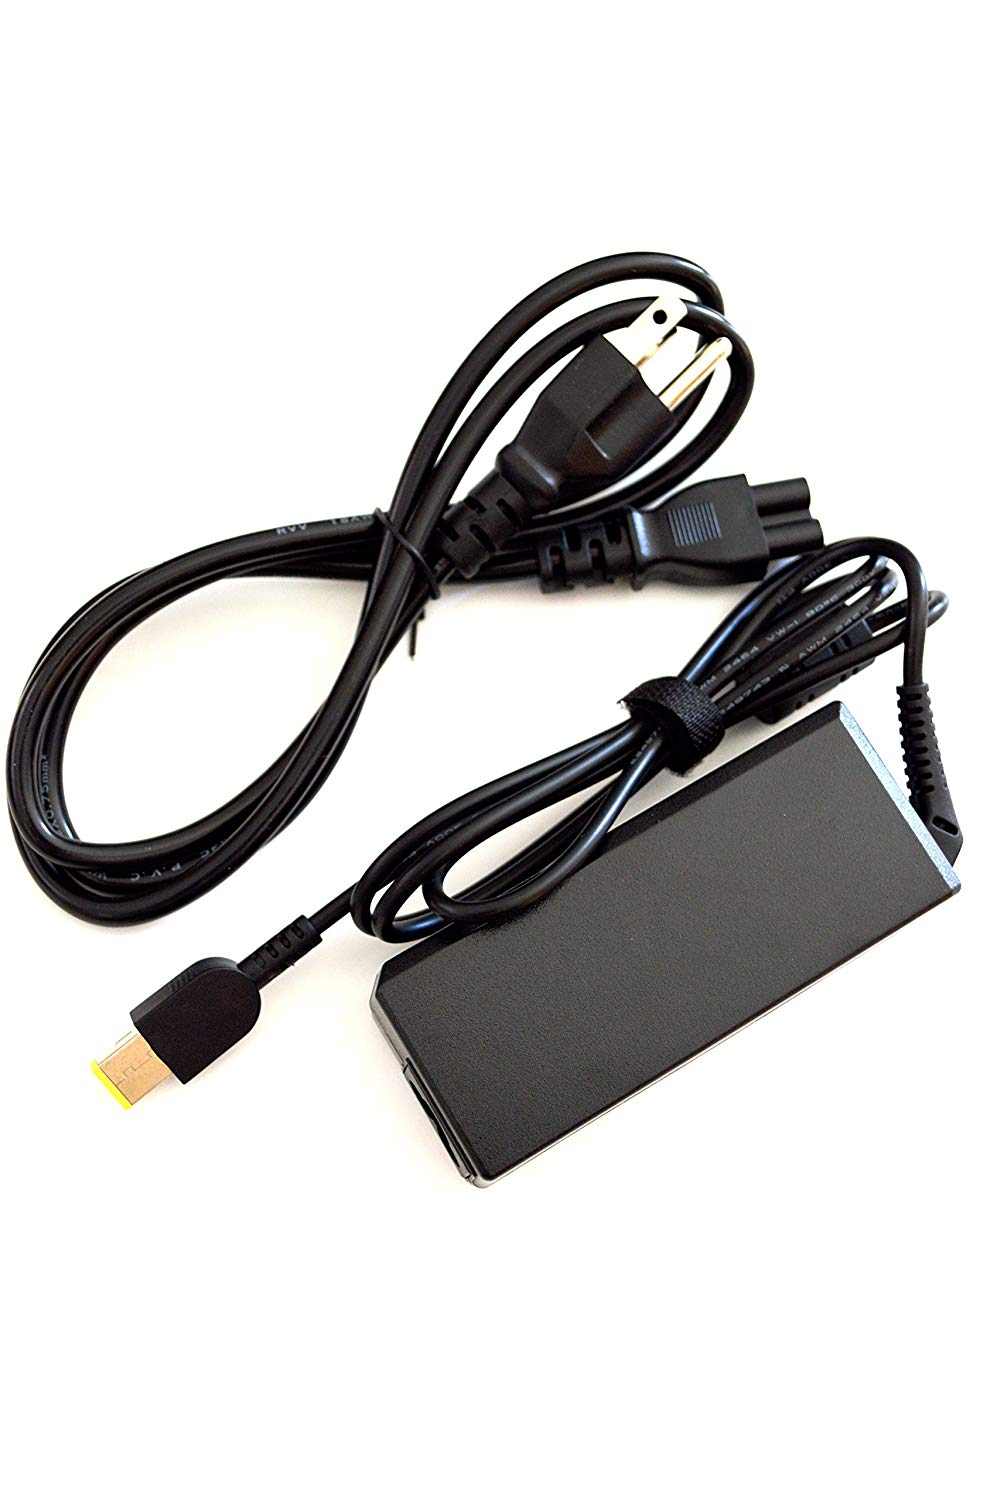 Adapter Charger for Lenovo B40-80 80LS001JUS Laptop Notebook Ultrabook Battery Power Supply Cord Plug